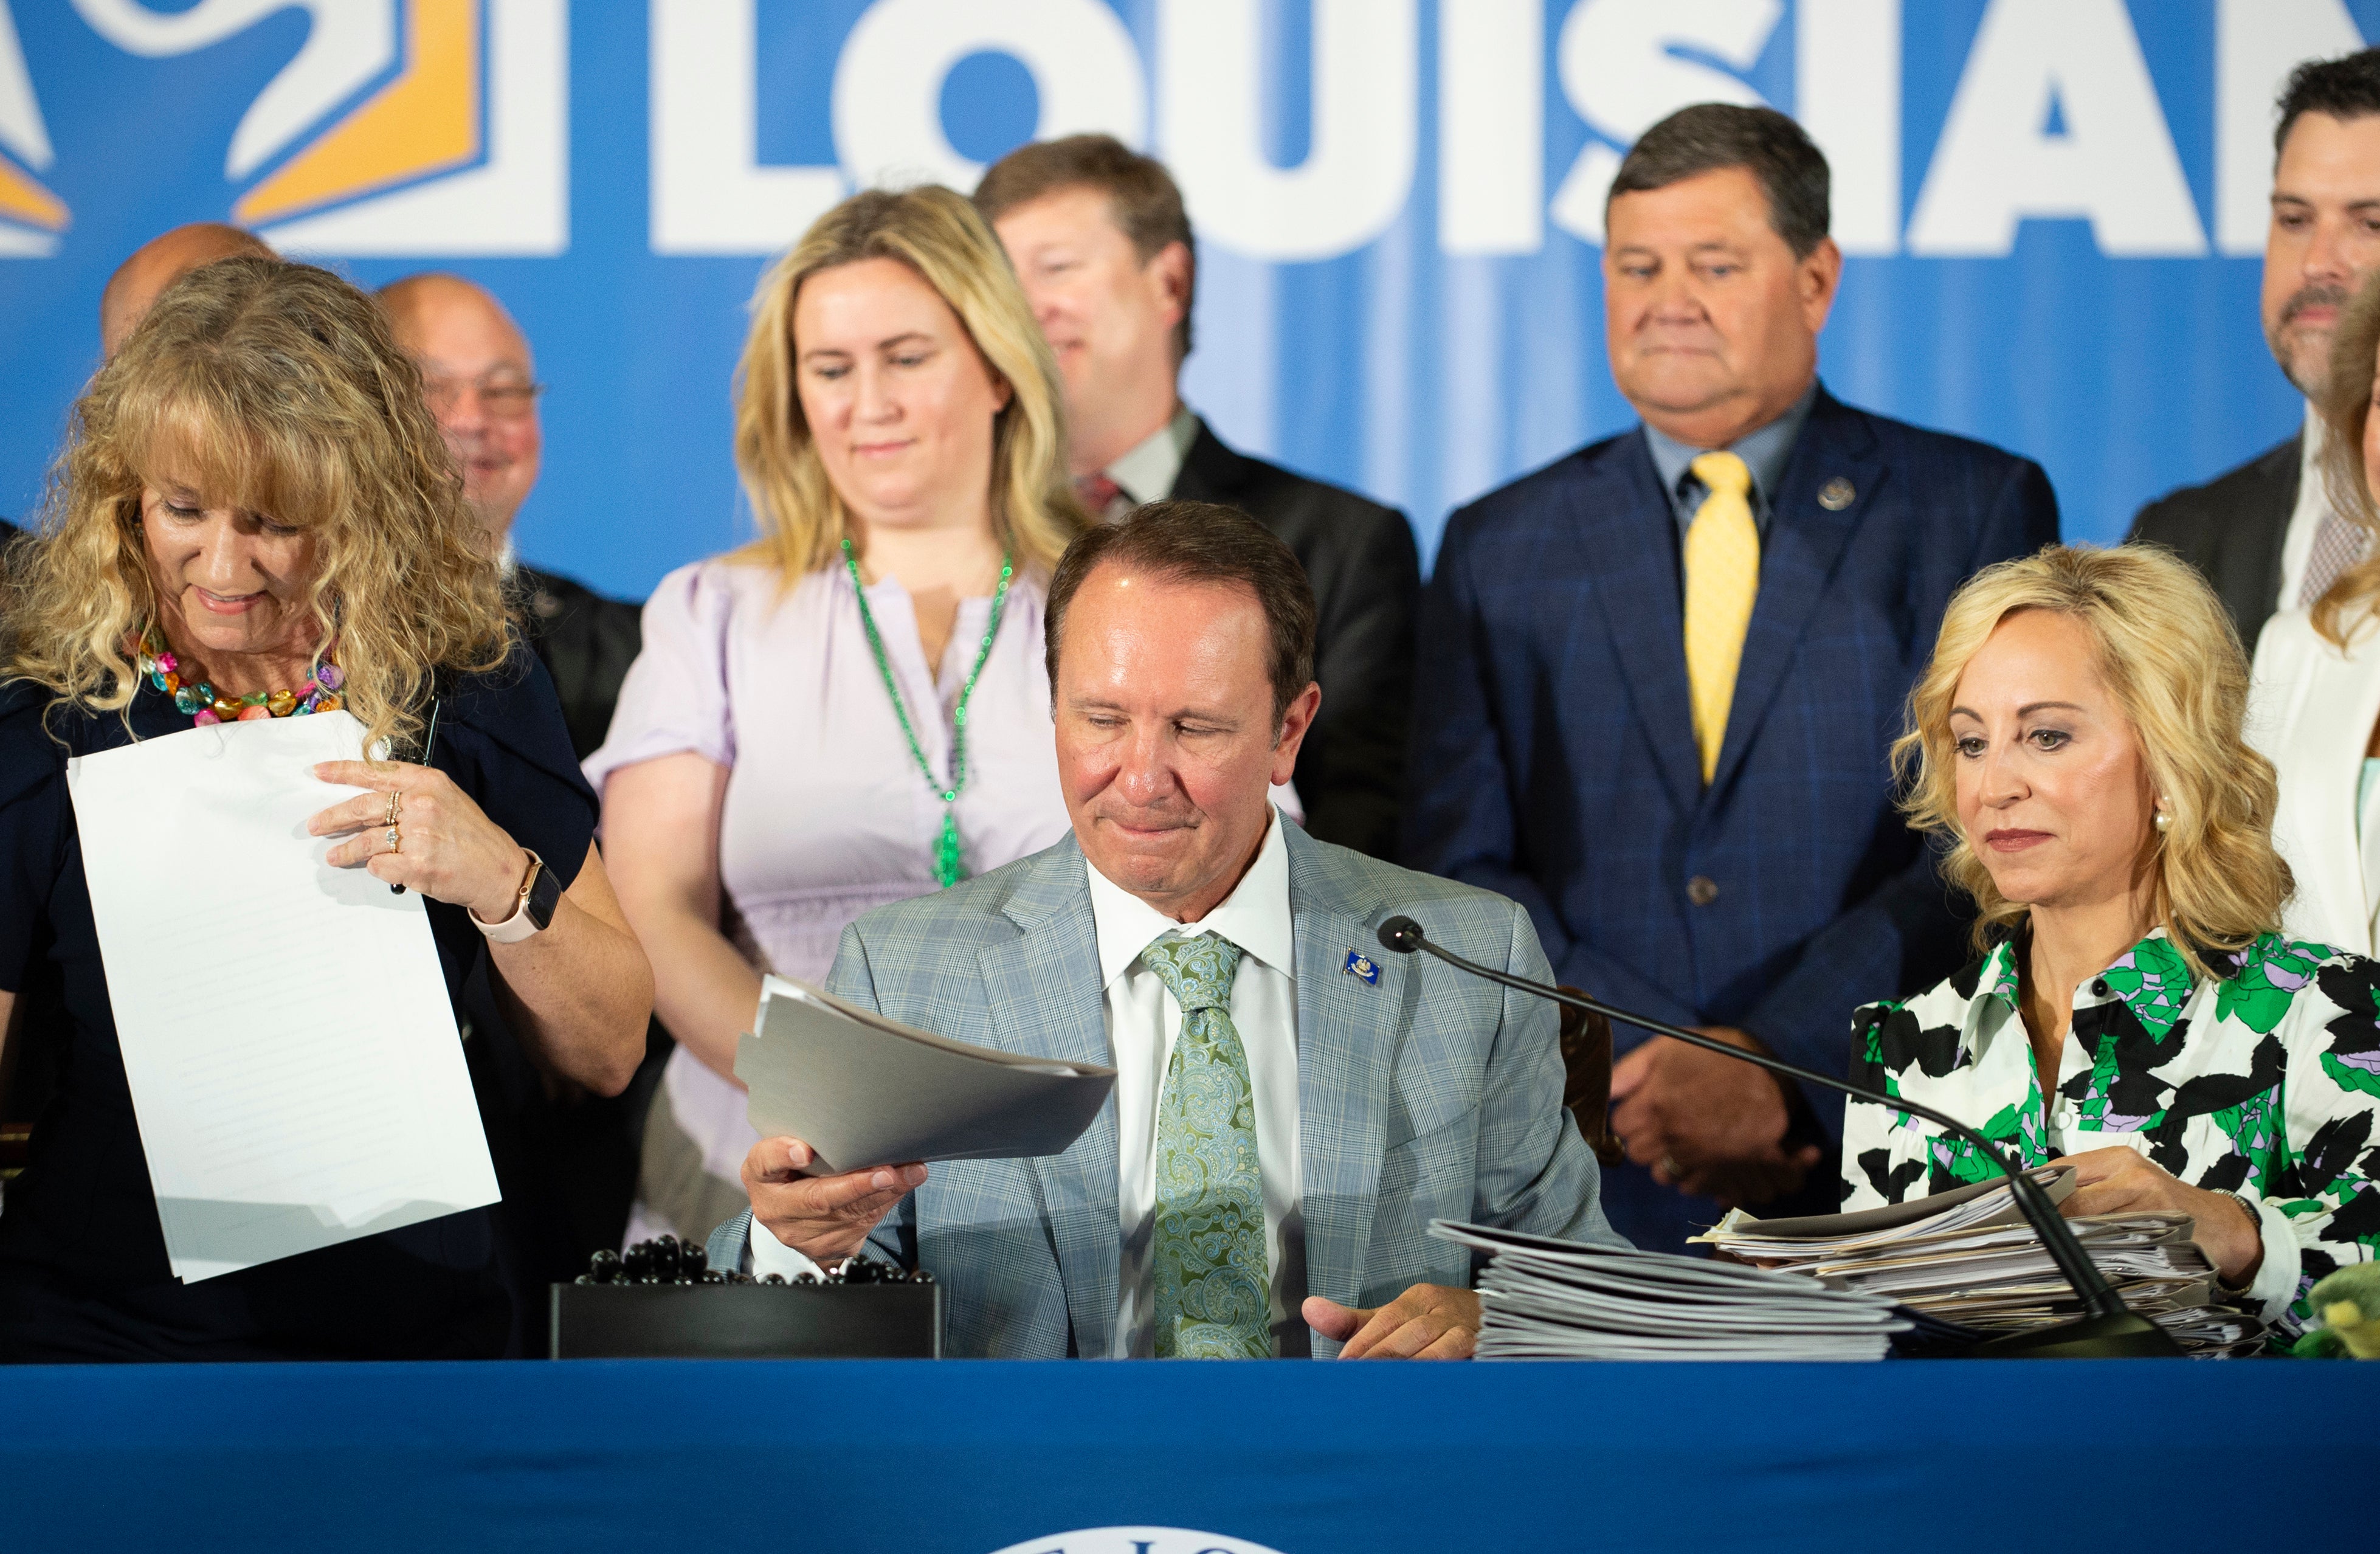 Louisiana Governor Jeff Landry has pushed a Christian agenda since becoming governor